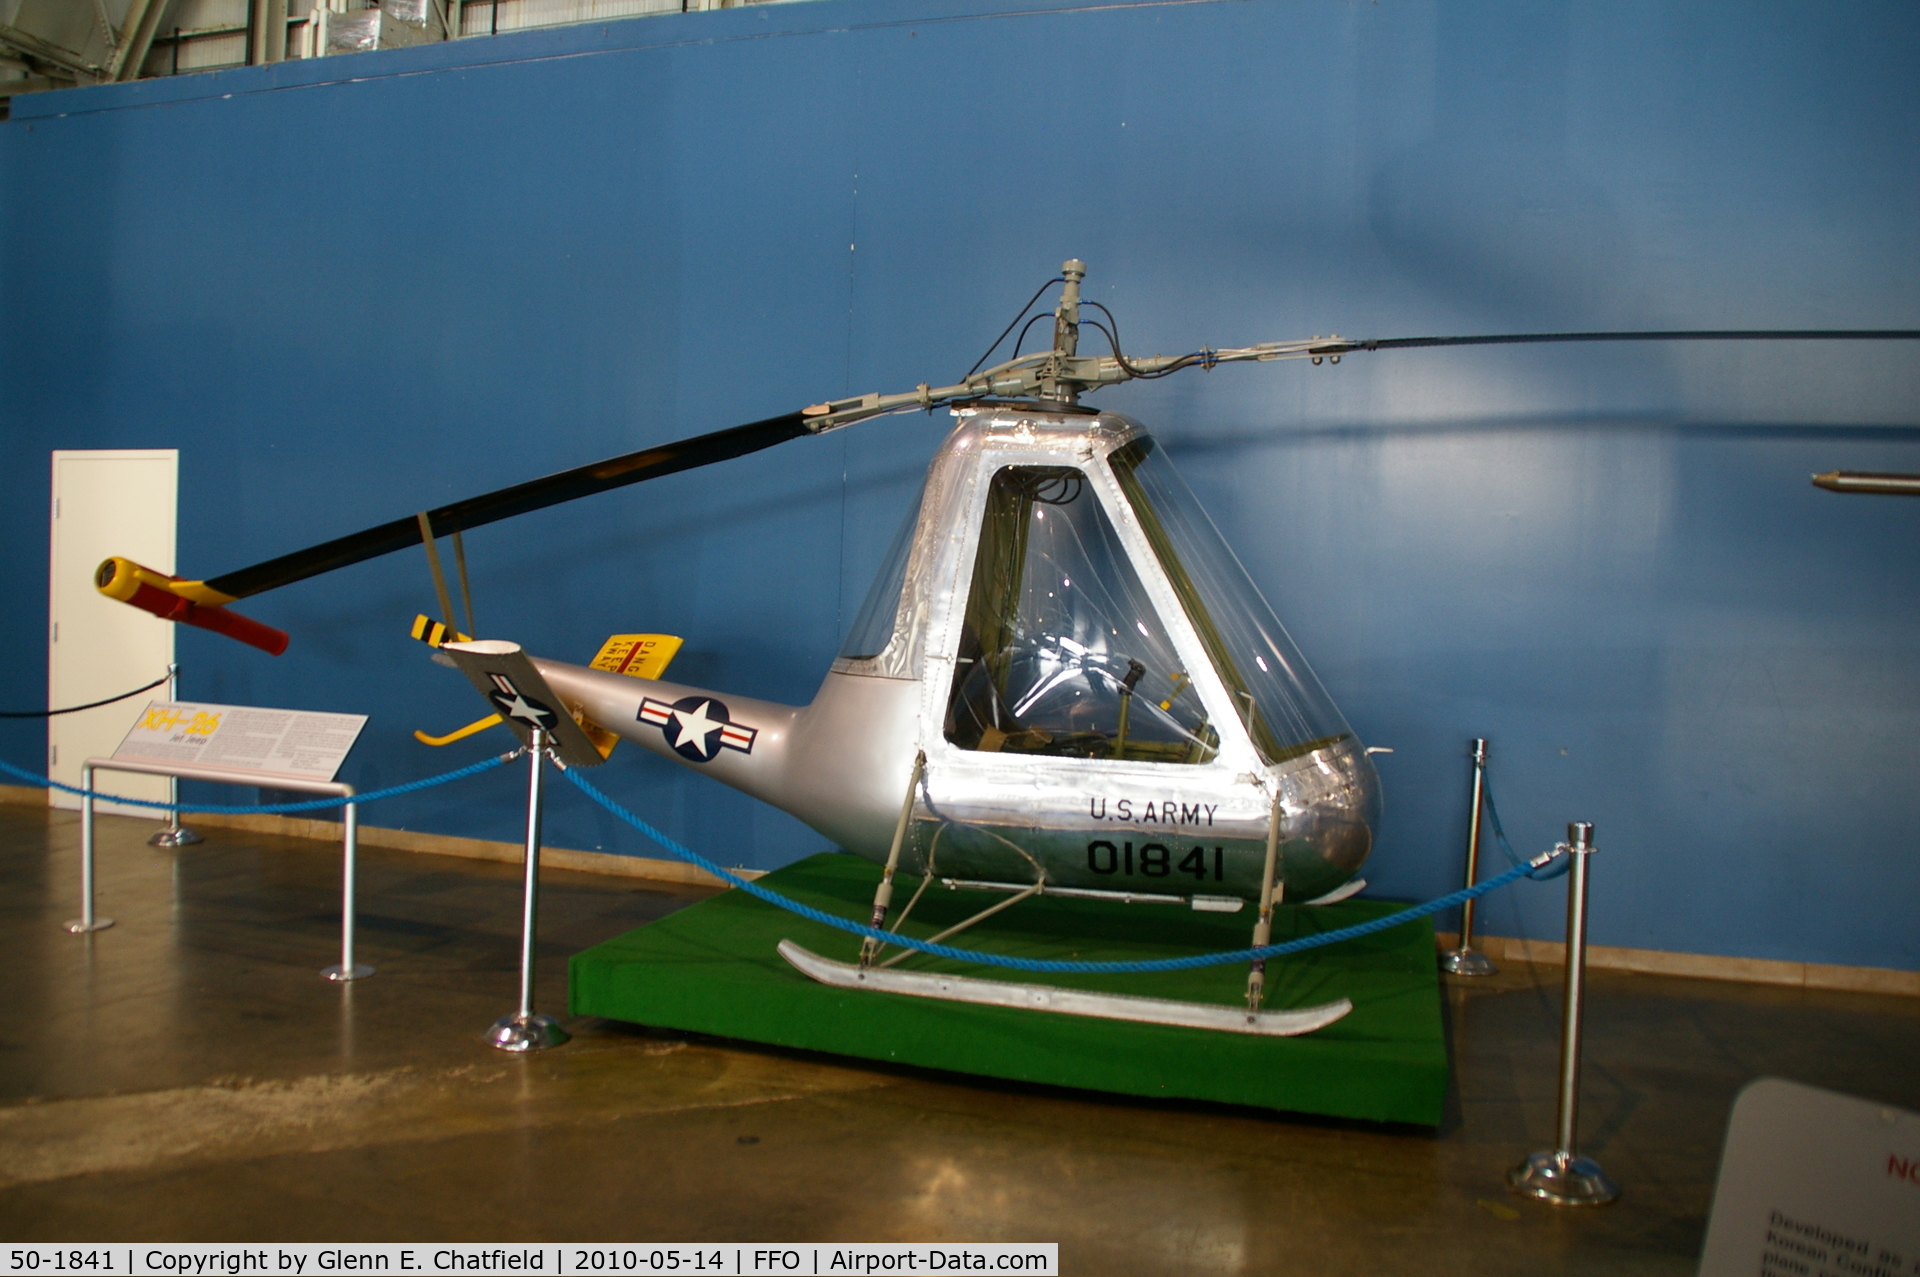 50-1841, 1951 American Helicopter Company XH-26 Jet Jeep C/N Unknown, In the R&D hangar of the National Museum of the USAF.